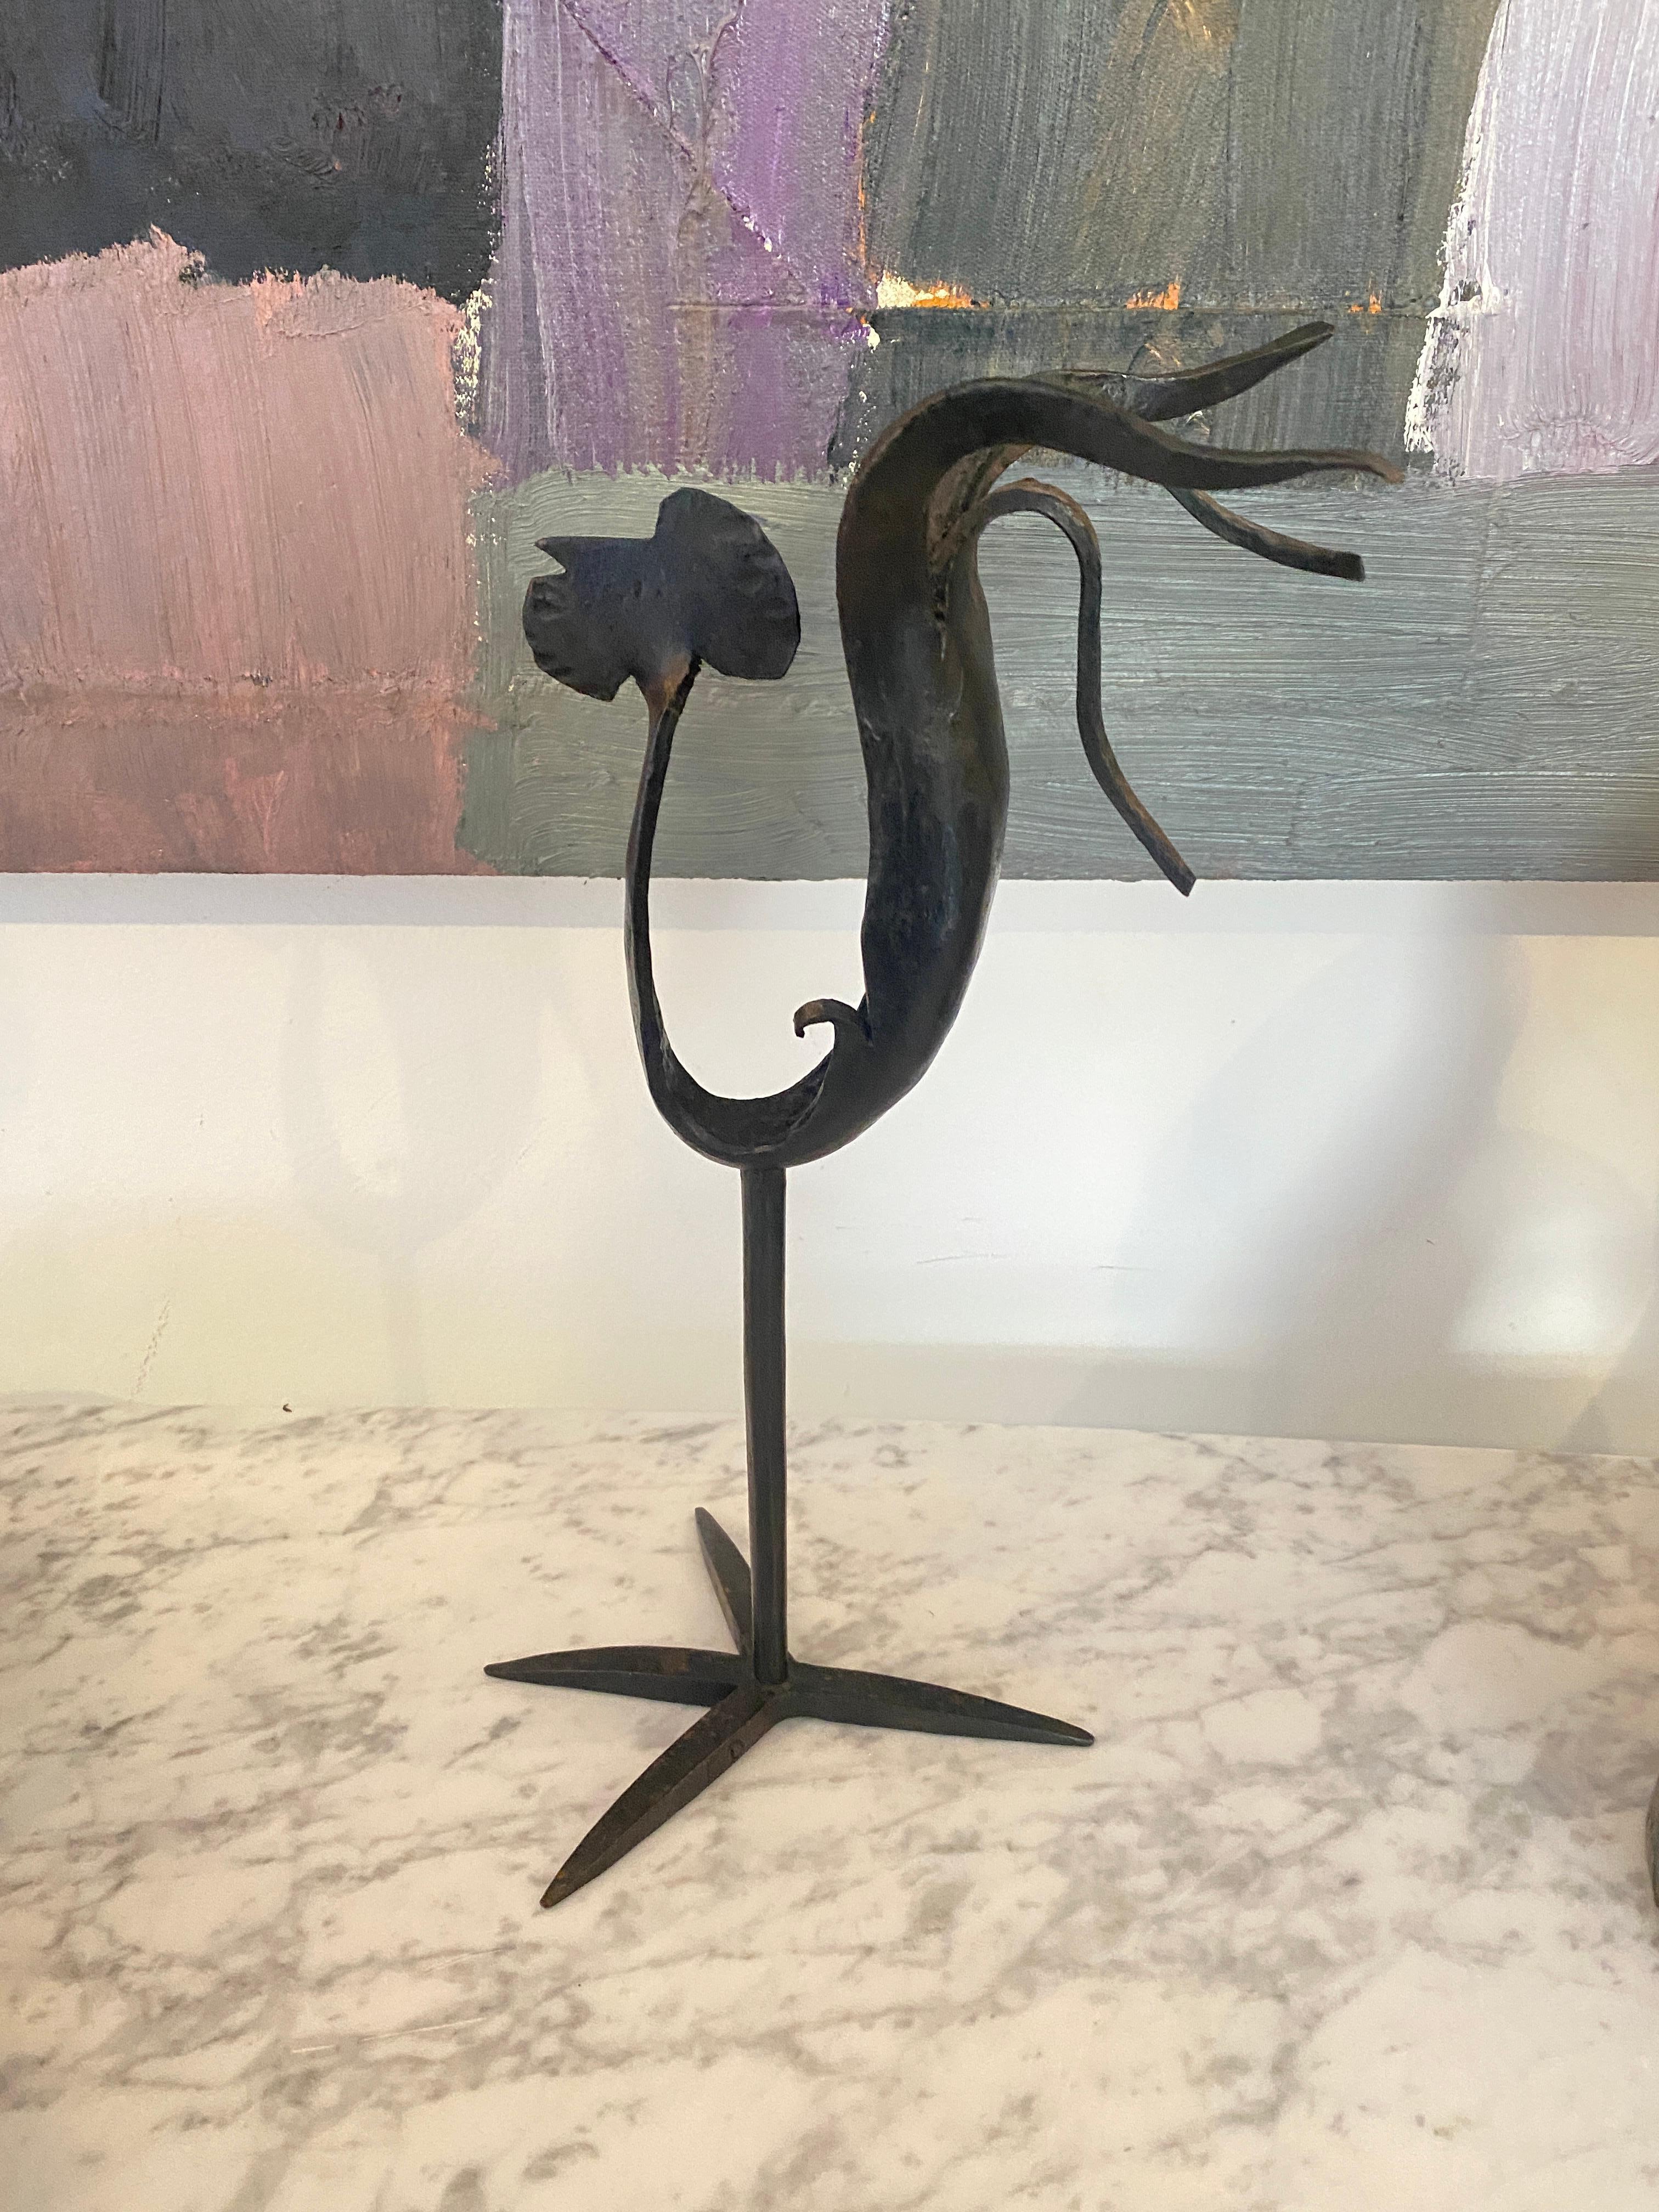 Ateliers Marolles France hand forged iron rooster or “coq” 
with black patina. Hand forged by Francis Dewaele ,who was the iron artisan at Ateliers Marolles.circa 1950's/
